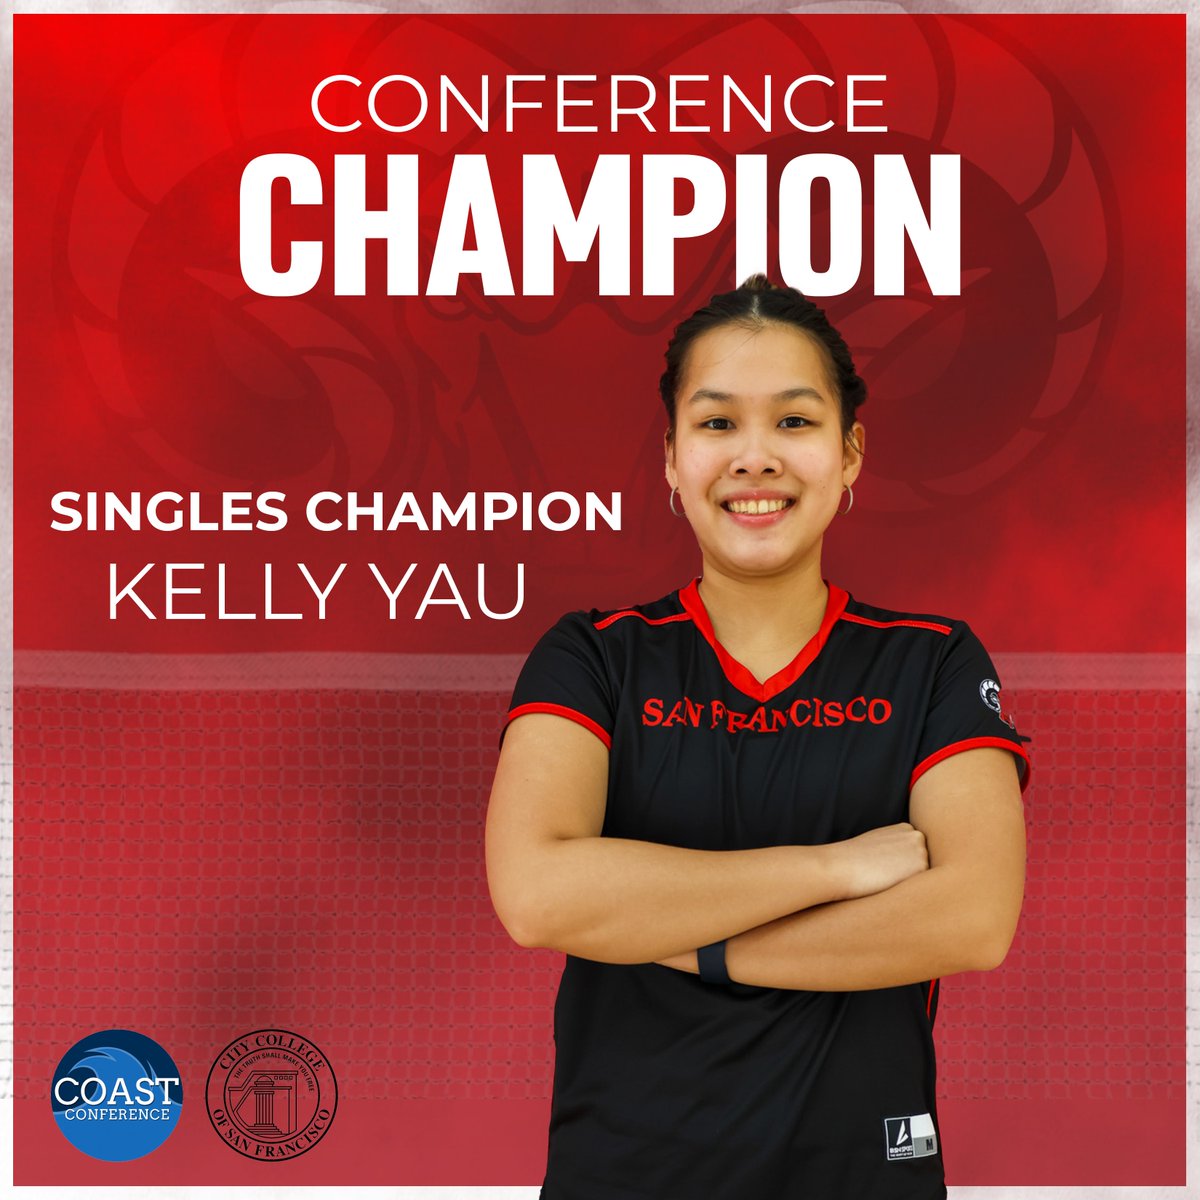 Congrats to Kelly Yau on winning the Coast Conference Singles Championship 🏸🏆